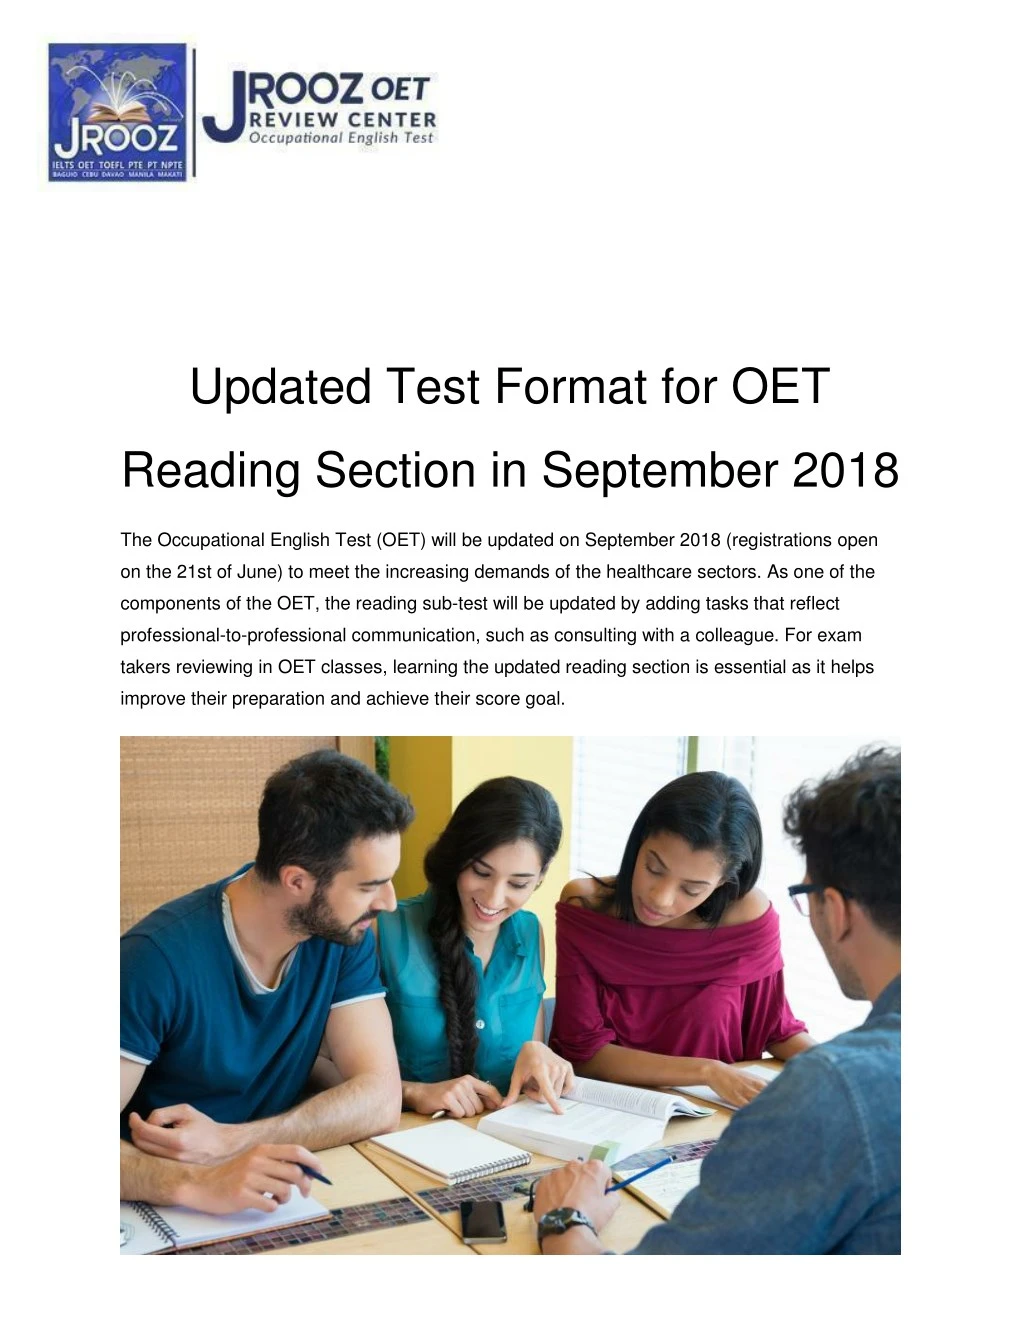 updated test format for oet